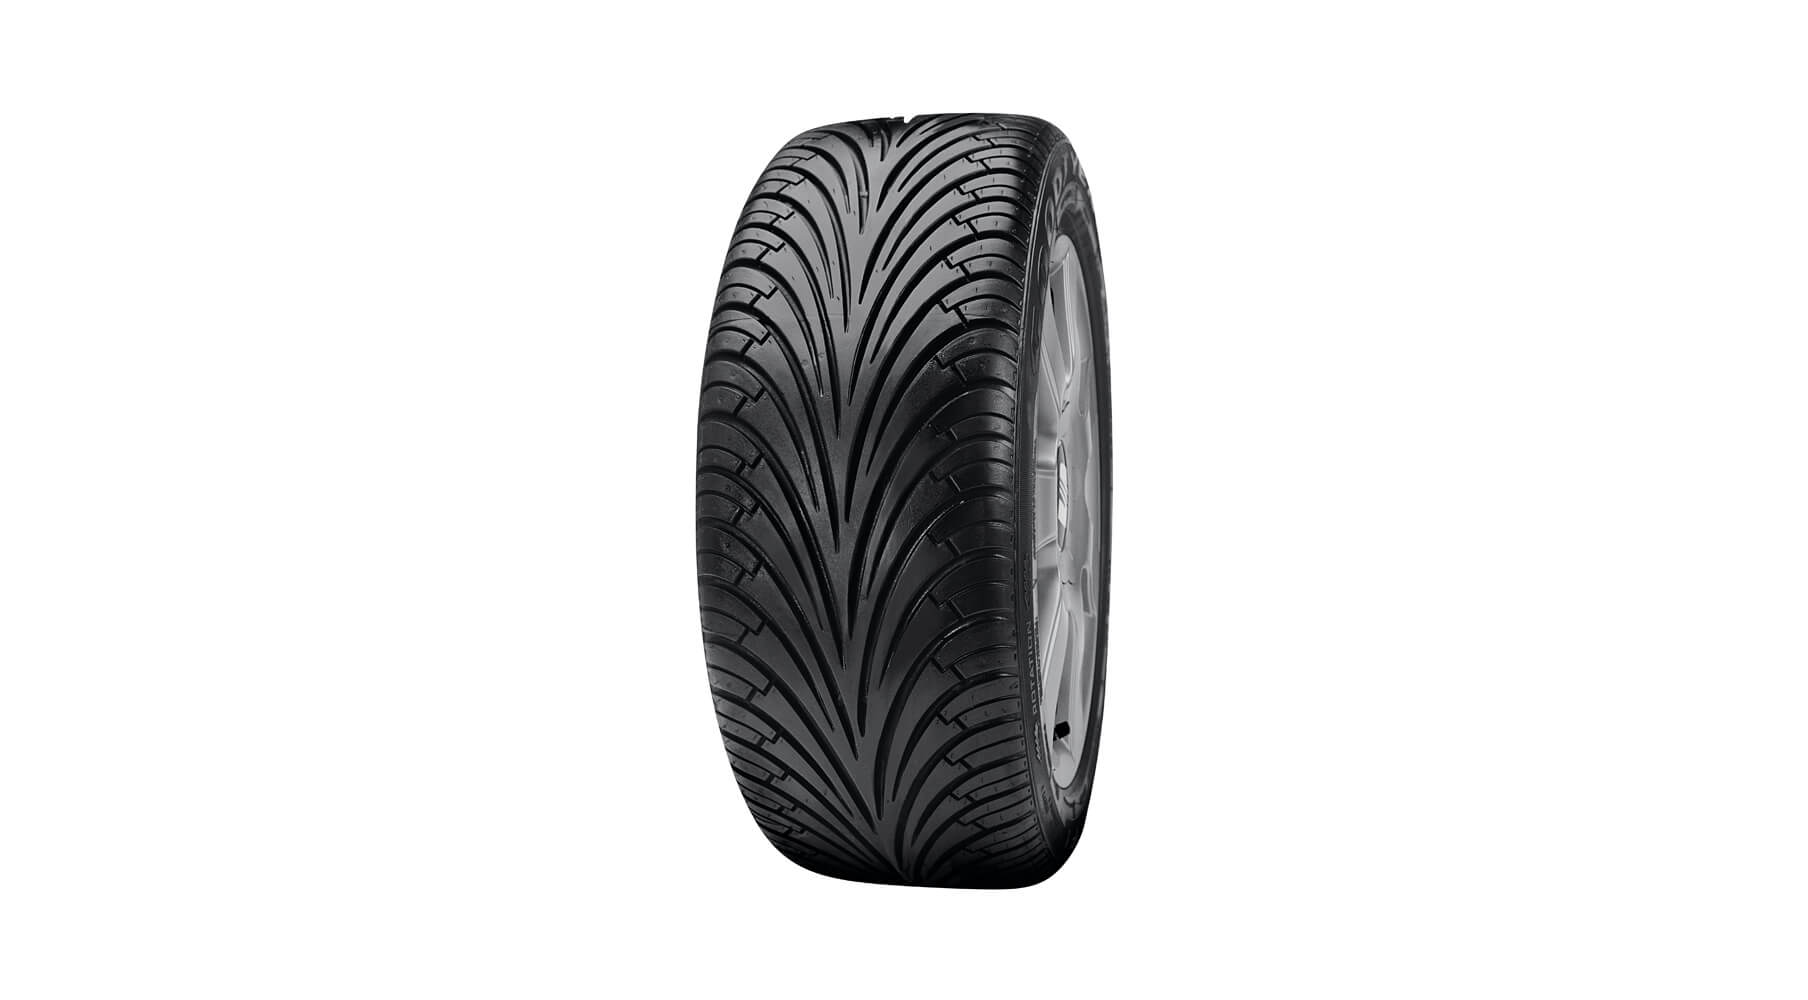 SEAT Tyres with reduced rolling resistance